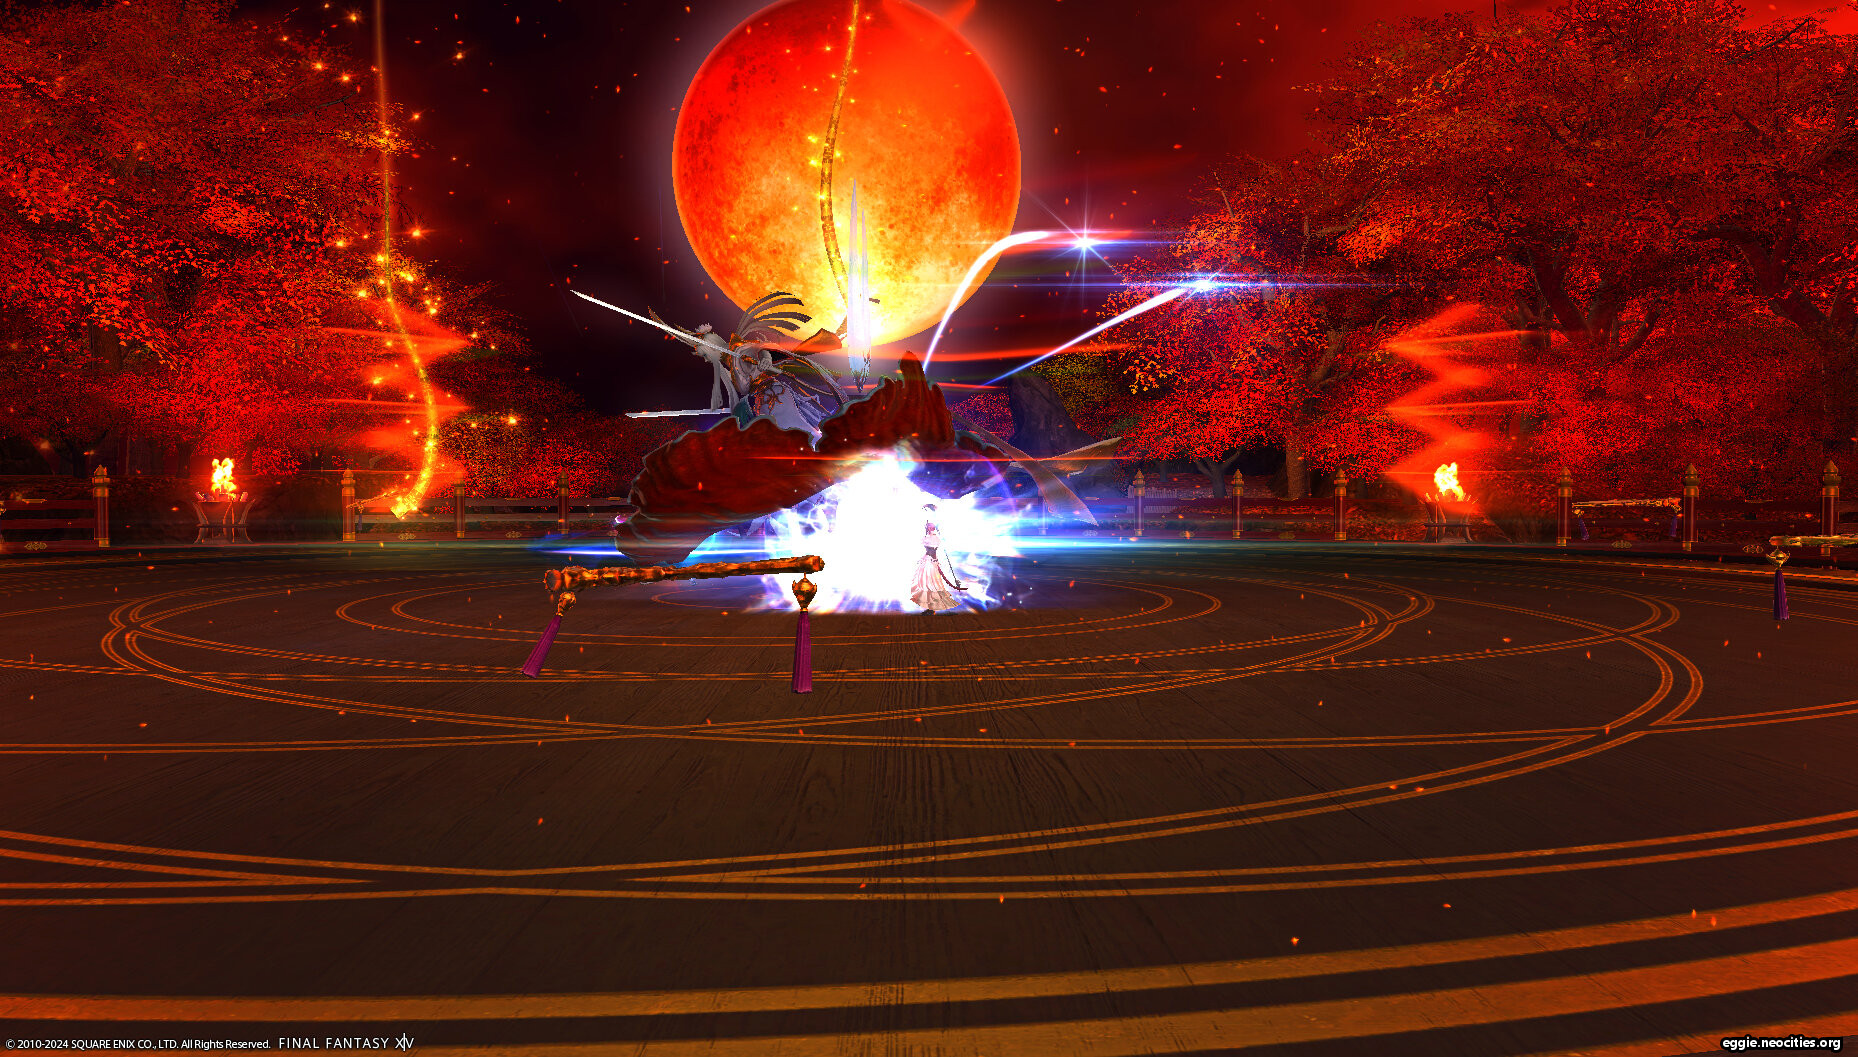 Naoh and Zel fighting Tsukuyomi. The red full moon is behind Tsukuyomi in this shot.